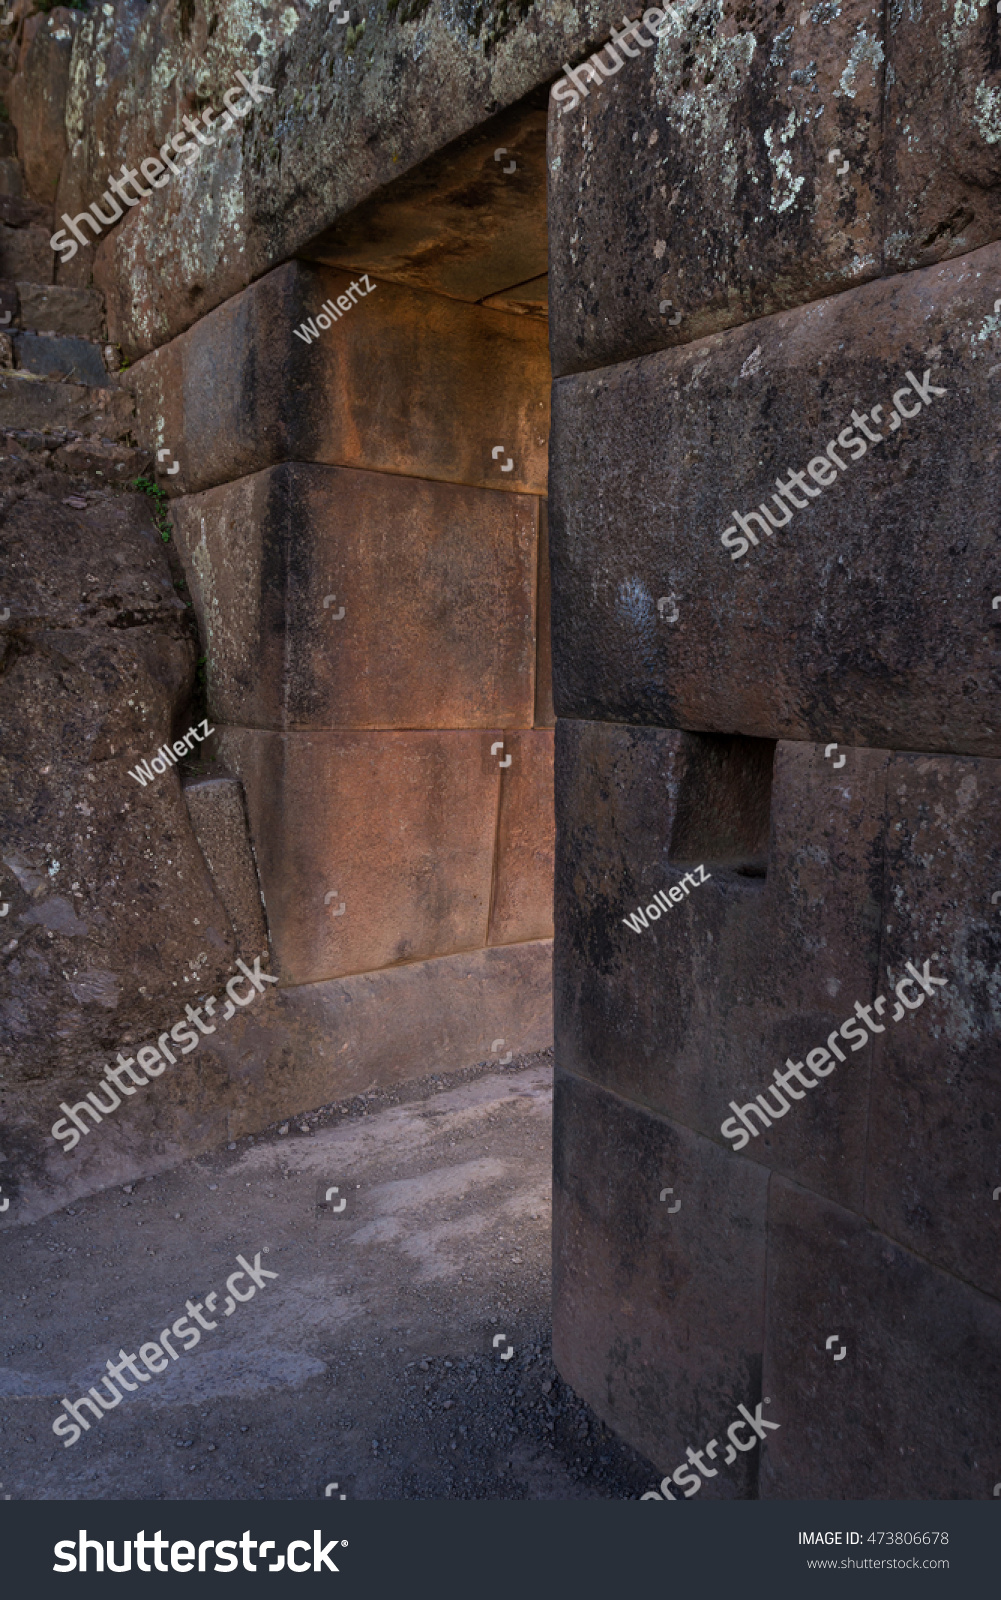 Amazing inca Stone work with precision and perfection as seen here on a doorway #473806678